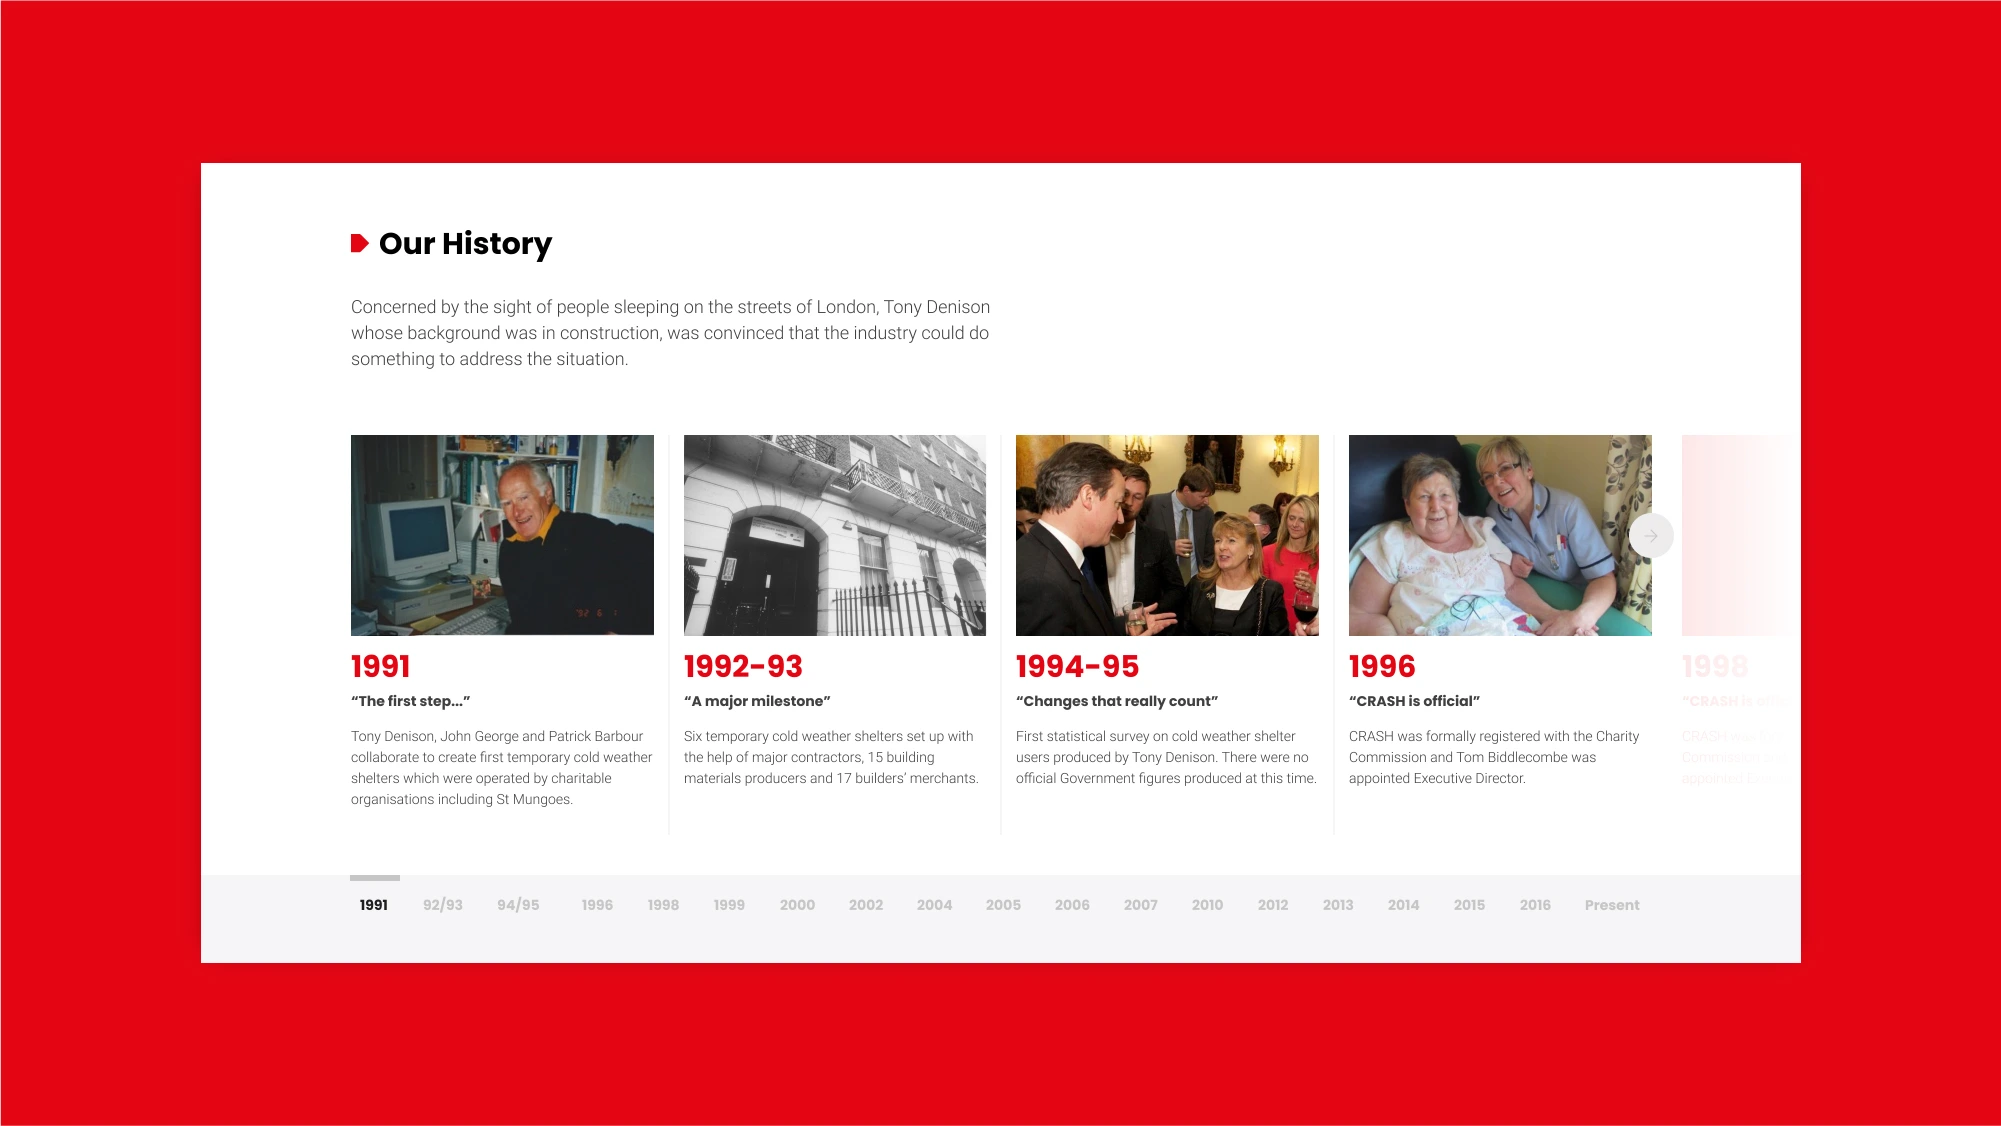 Our history section on crash website